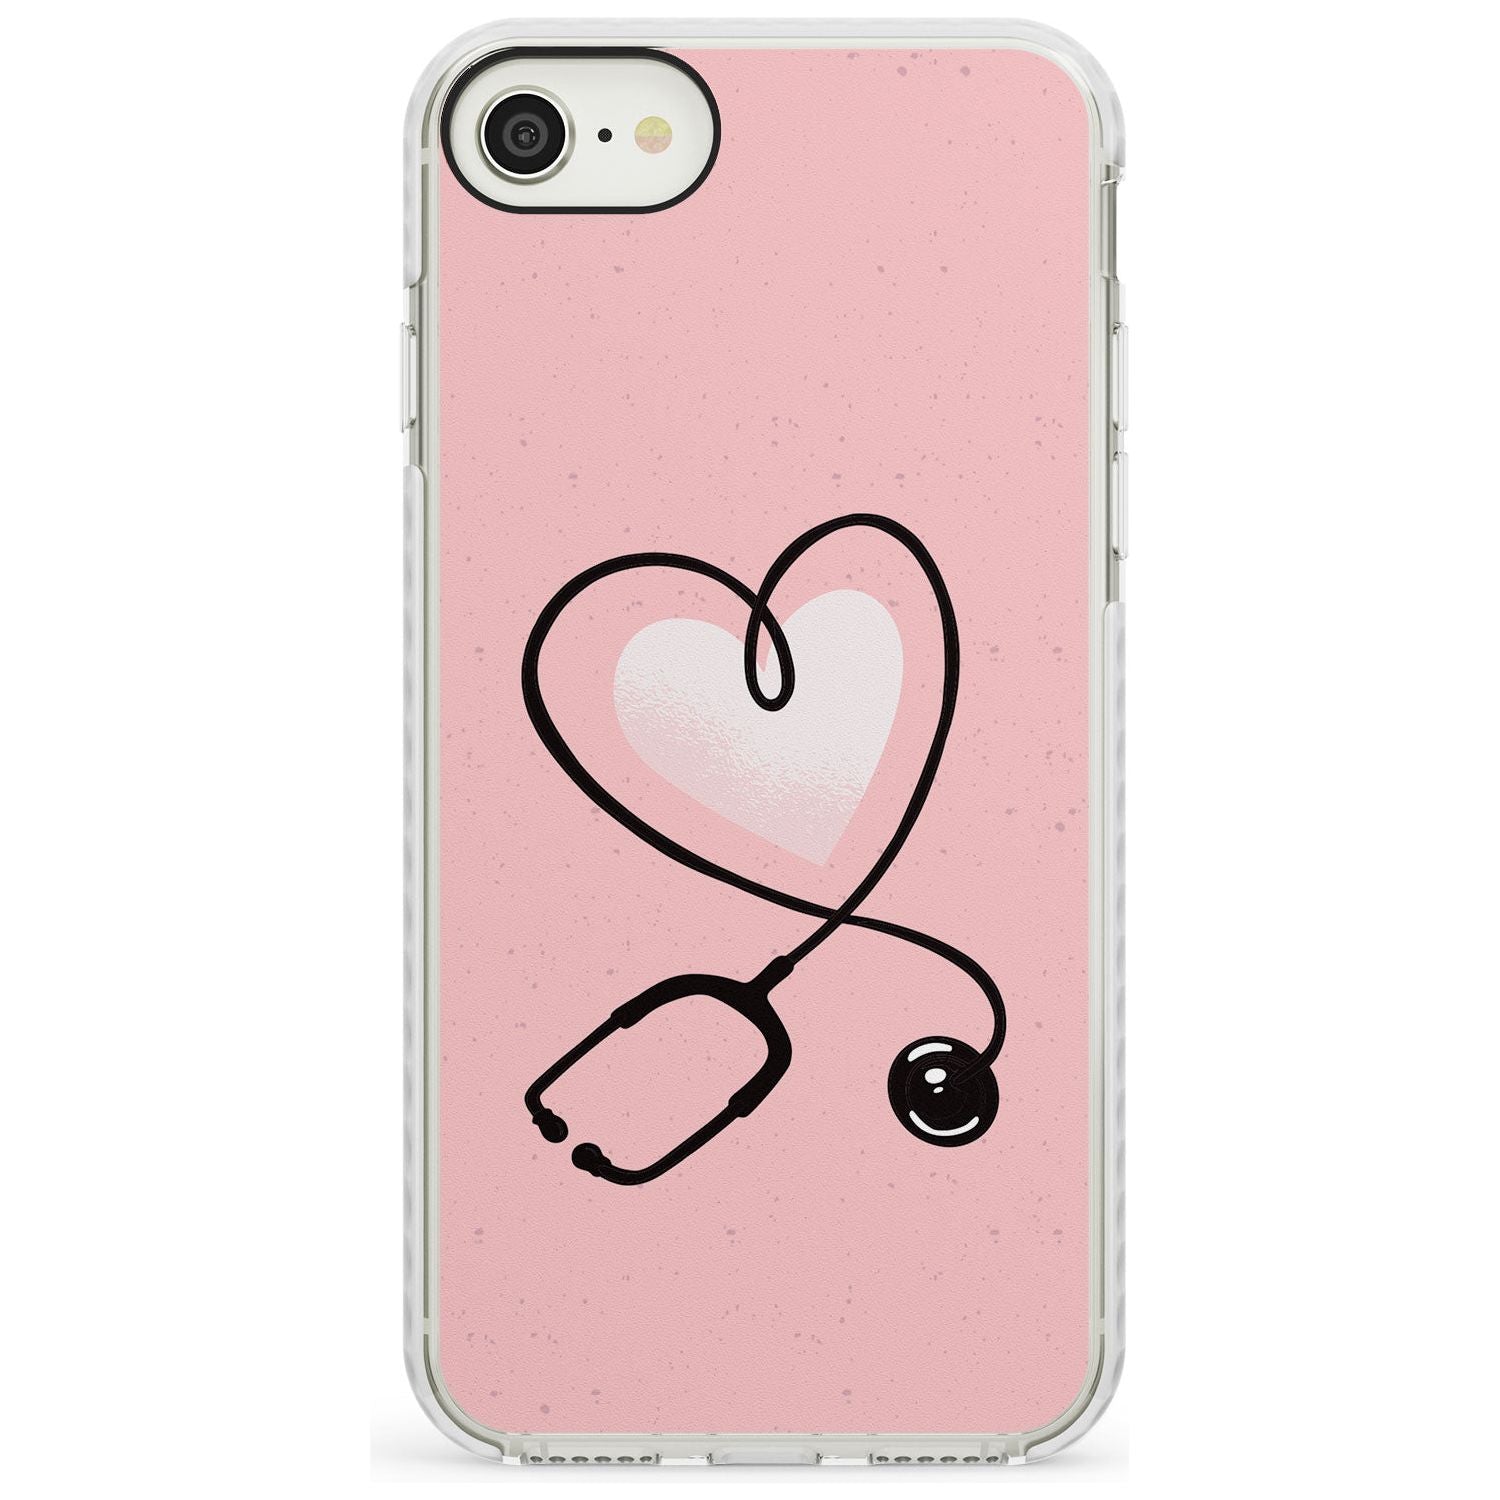 Medical Inspired Design Stethoscope Heart Impact Phone Case for iPhone SE 8 7 Plus